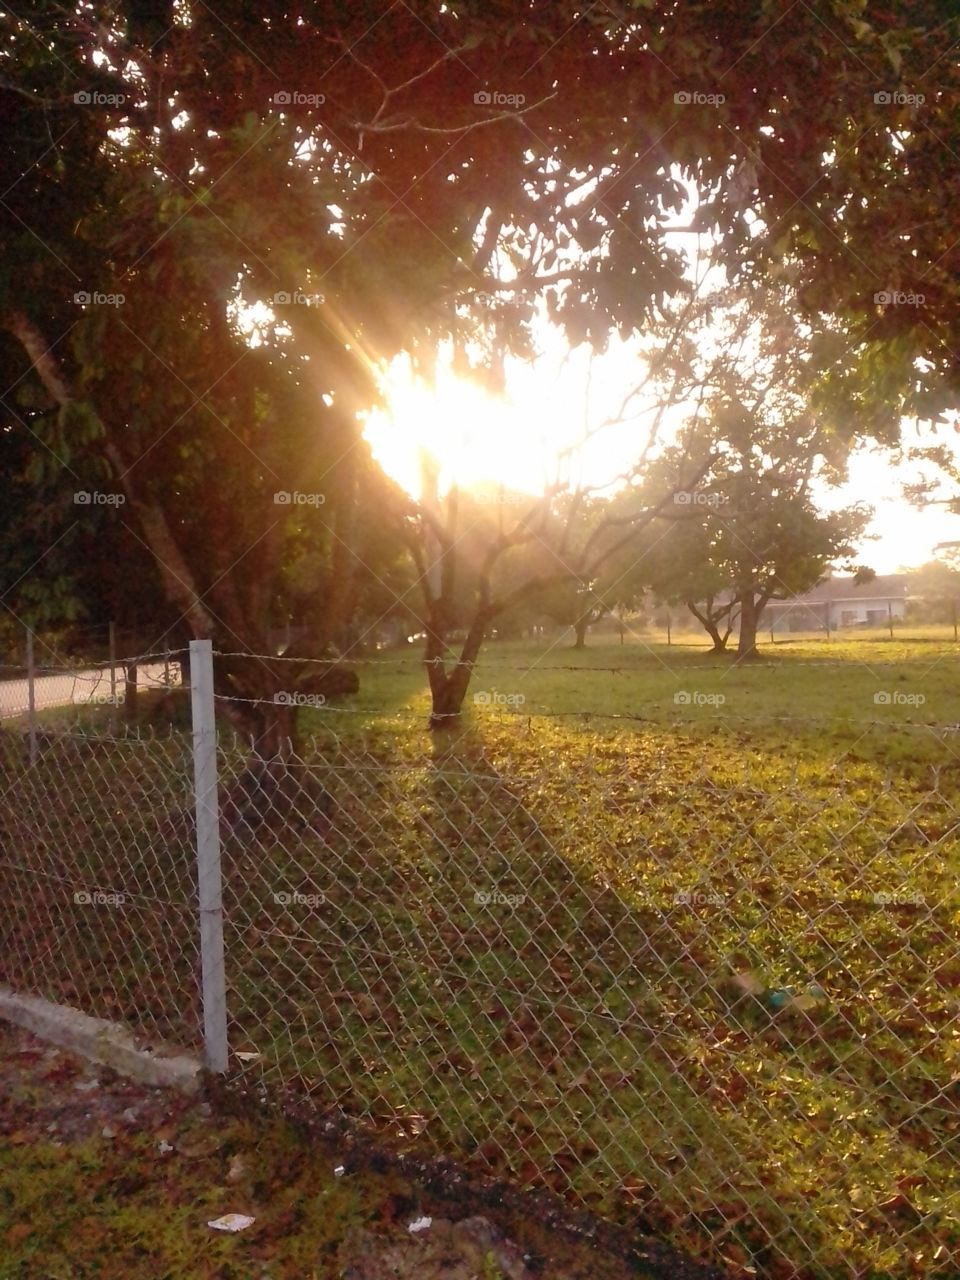 Sunrise from Malaysian fenced  garden. 

The image was taken in early morning of May during  Malaysian rainy season. The beauty of sunrise reflects the awe of our mother nature in signalling the beginning of day and life on earth.